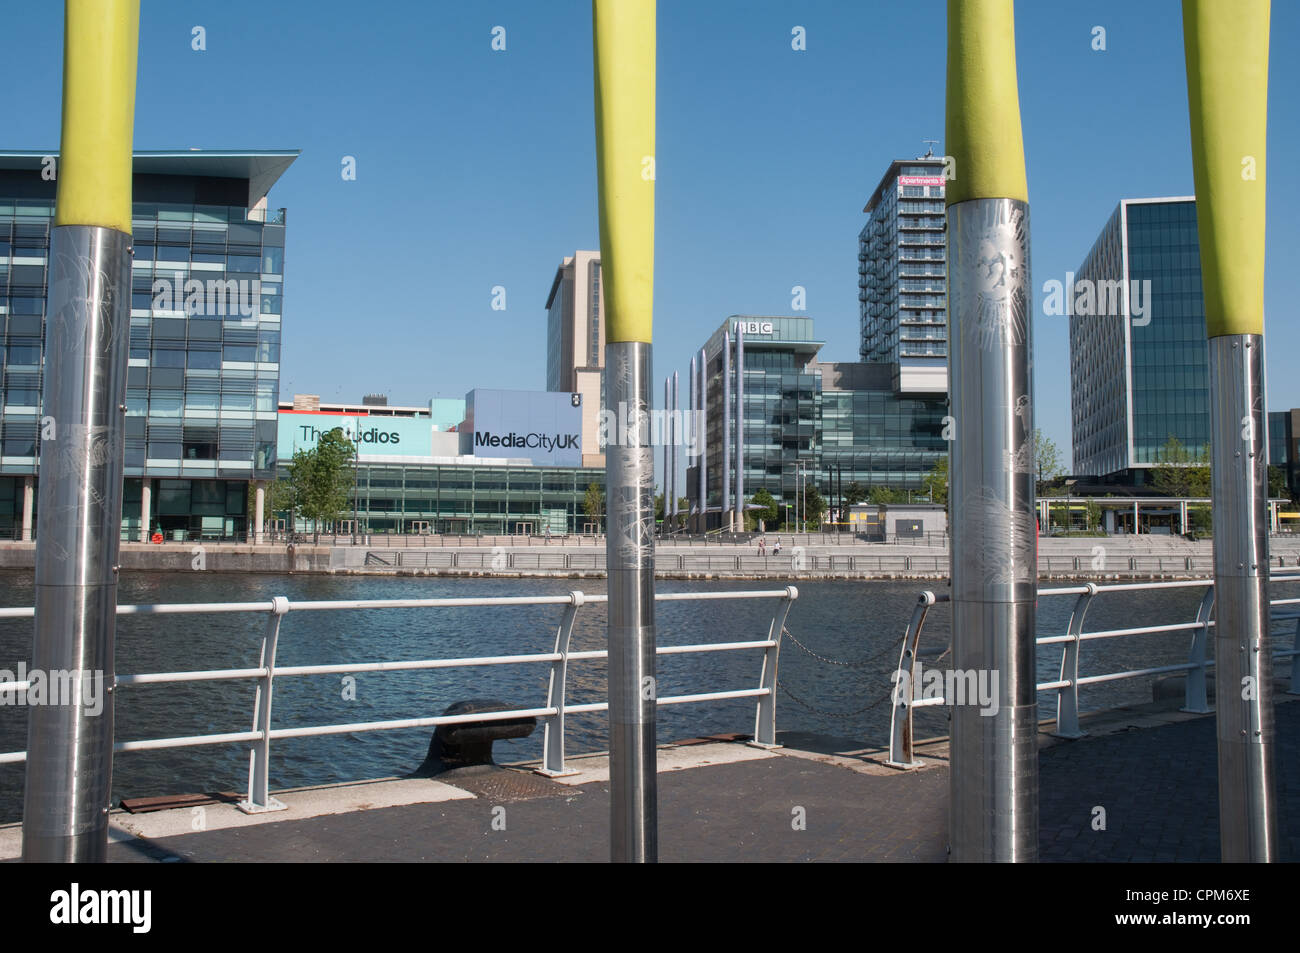 Media City UK, Salford Quays. In the foreground is the sculpture Were the Wild Things Were Created by Unusual. Stock Photo